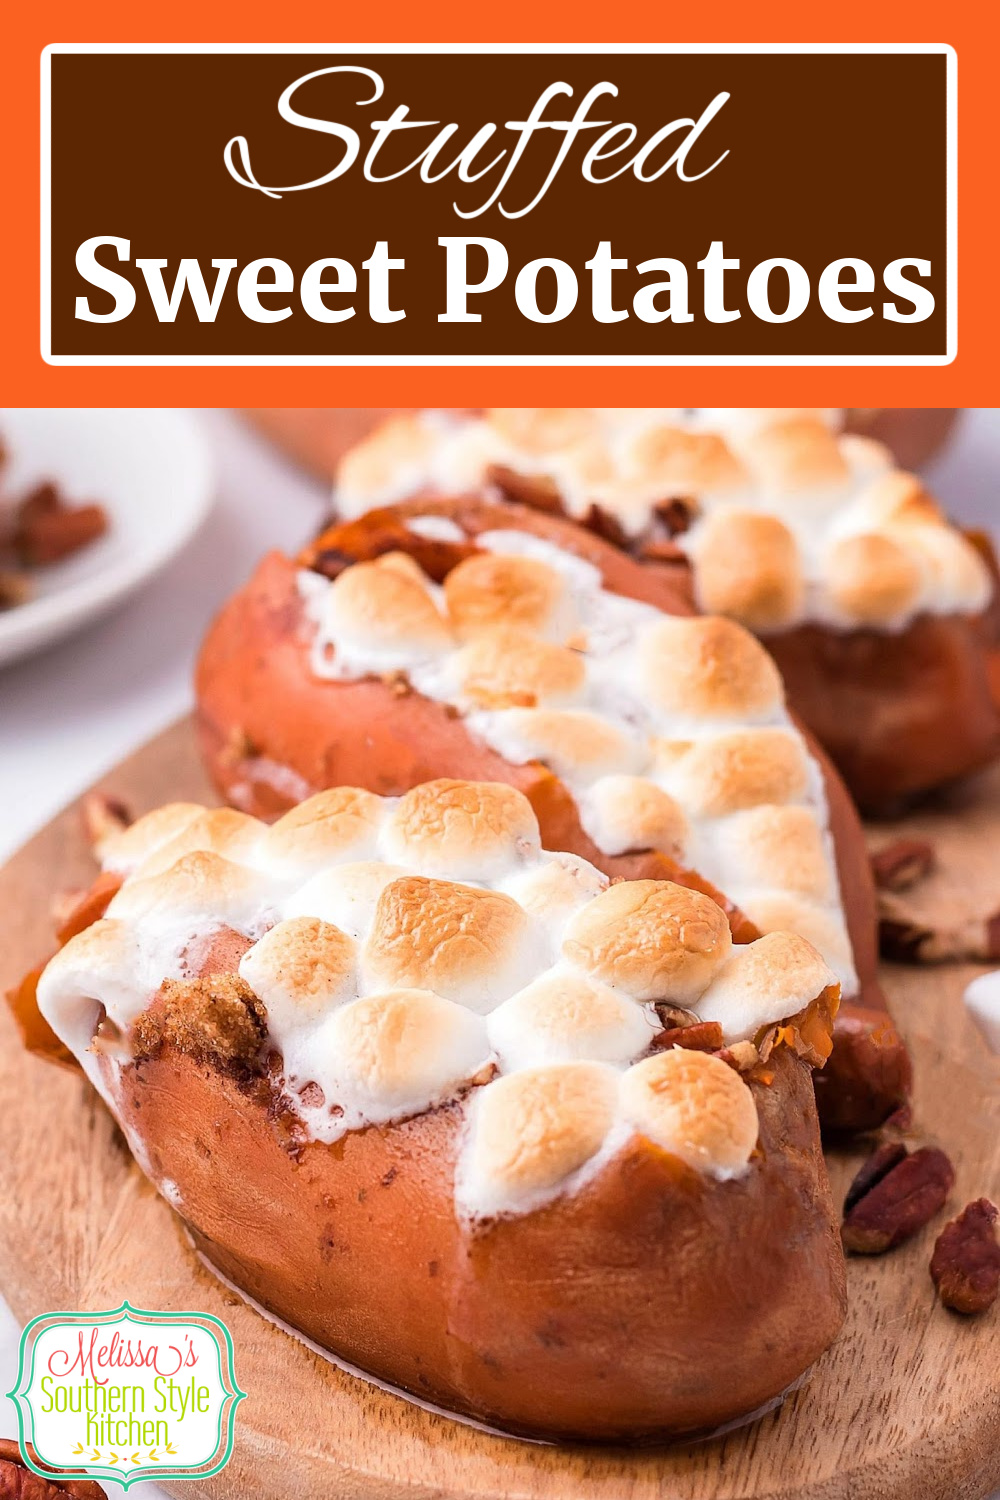 These Stuffed Sweet Potatoes are filled with a buttery amalgamation of brown sugar and pecans topped with toasted gooey mini marshmallows #sweetpotatoes #stuffedsweetpotatoes #sweetpotatocasserole #bakedsweetpotatoes #holidaysidedishrecipes #thanksgivingrecipes #easterrecipes #christmasrecipes #southernfood #southernrecipes via @melissasssk